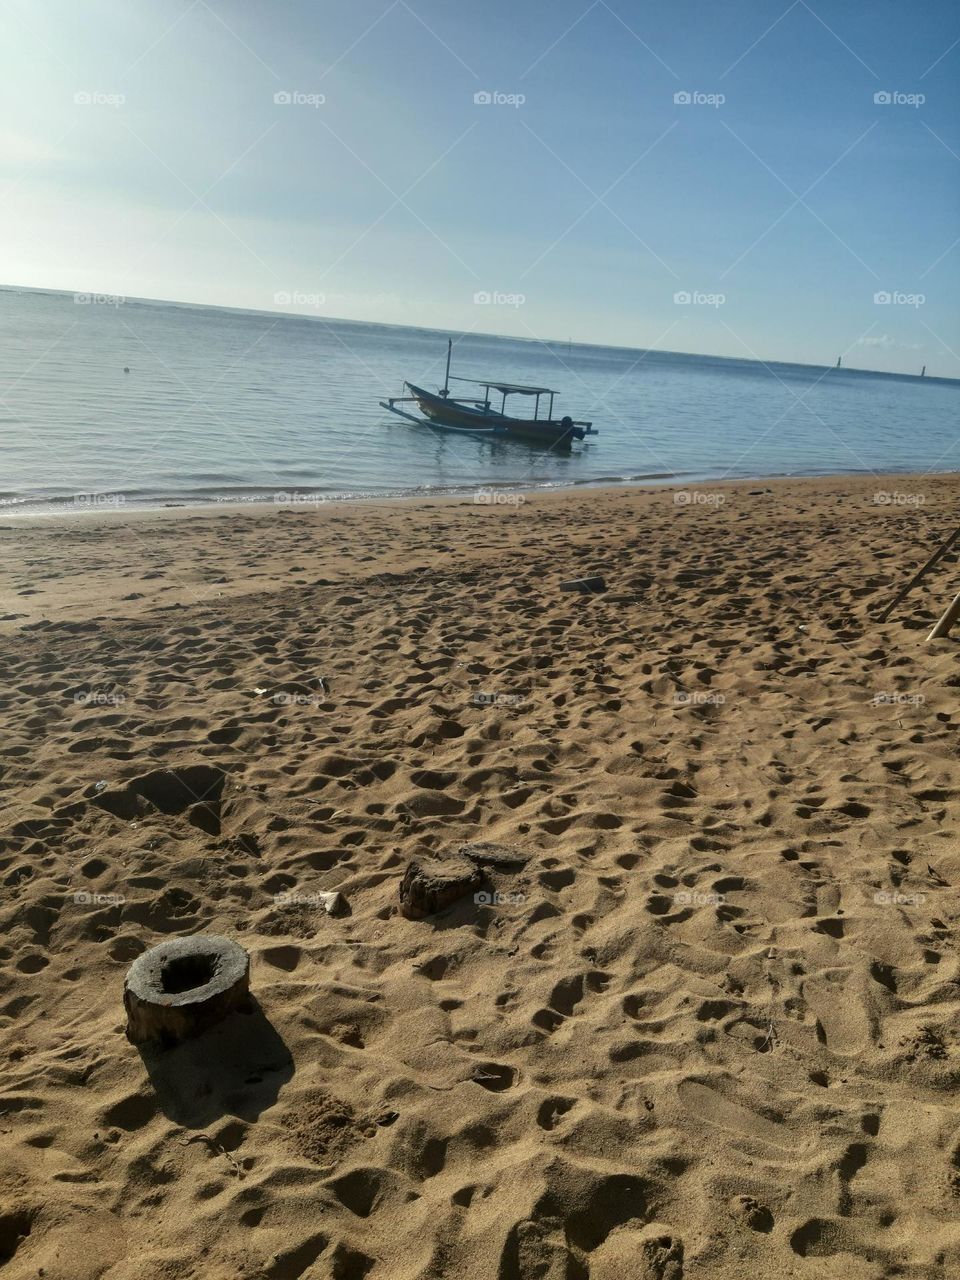 The beautiful morning view of sunrise seen from the brown soft sandy beach known as "Sanur Beach" which is located in Bali Island. In addition, there is a wooden fishing boat by the beach. It can tell us that most local people work as fisherman.